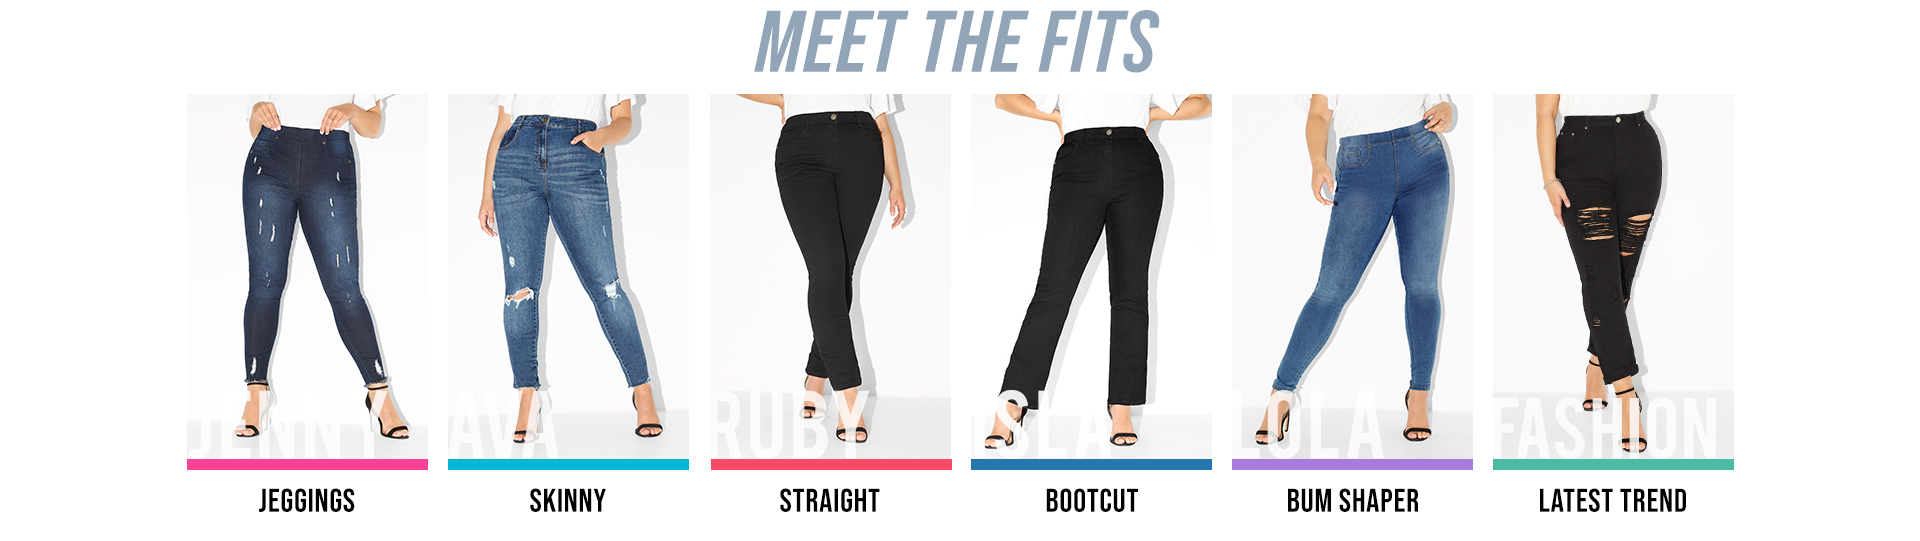 denim-fit-guide_yoursclothing_eng | Yours Clothing